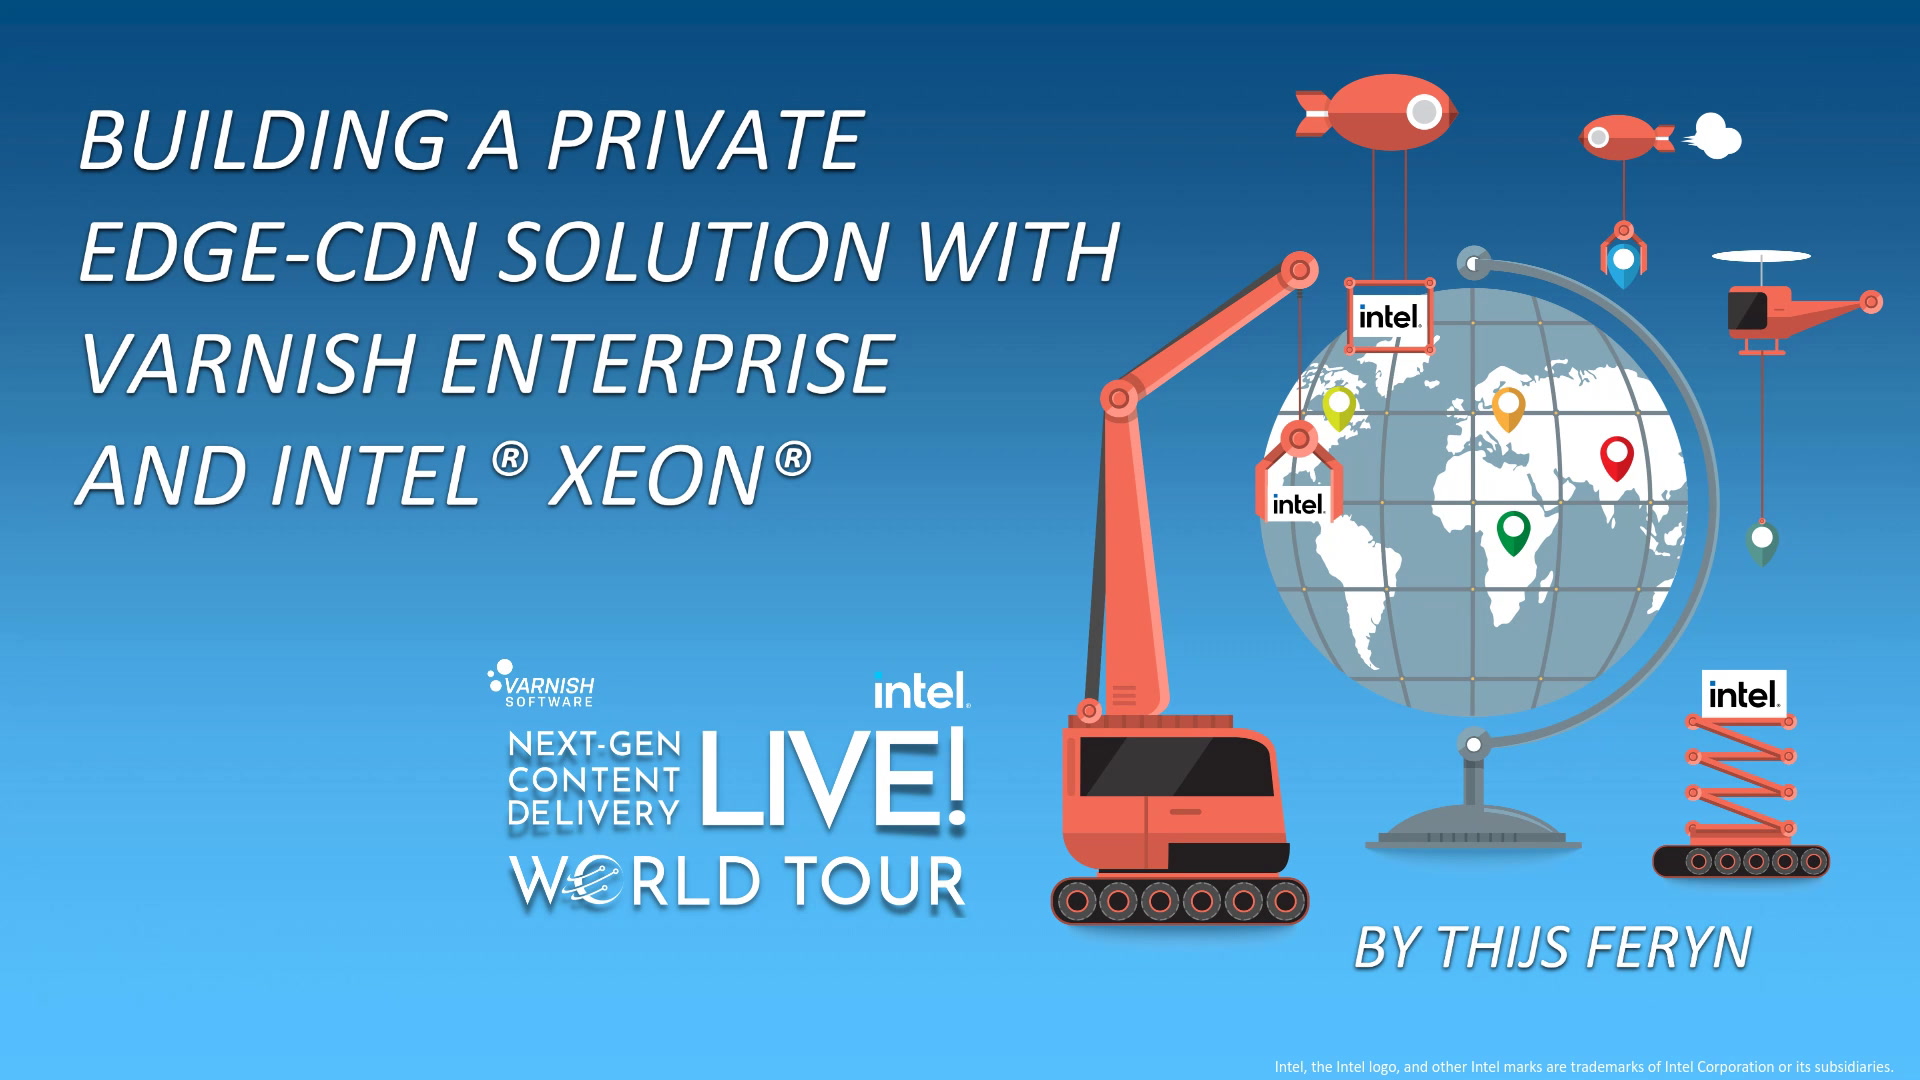 Building a Private Edge-CDN Solution with Varnish Enterprise and Intel® Xeon®